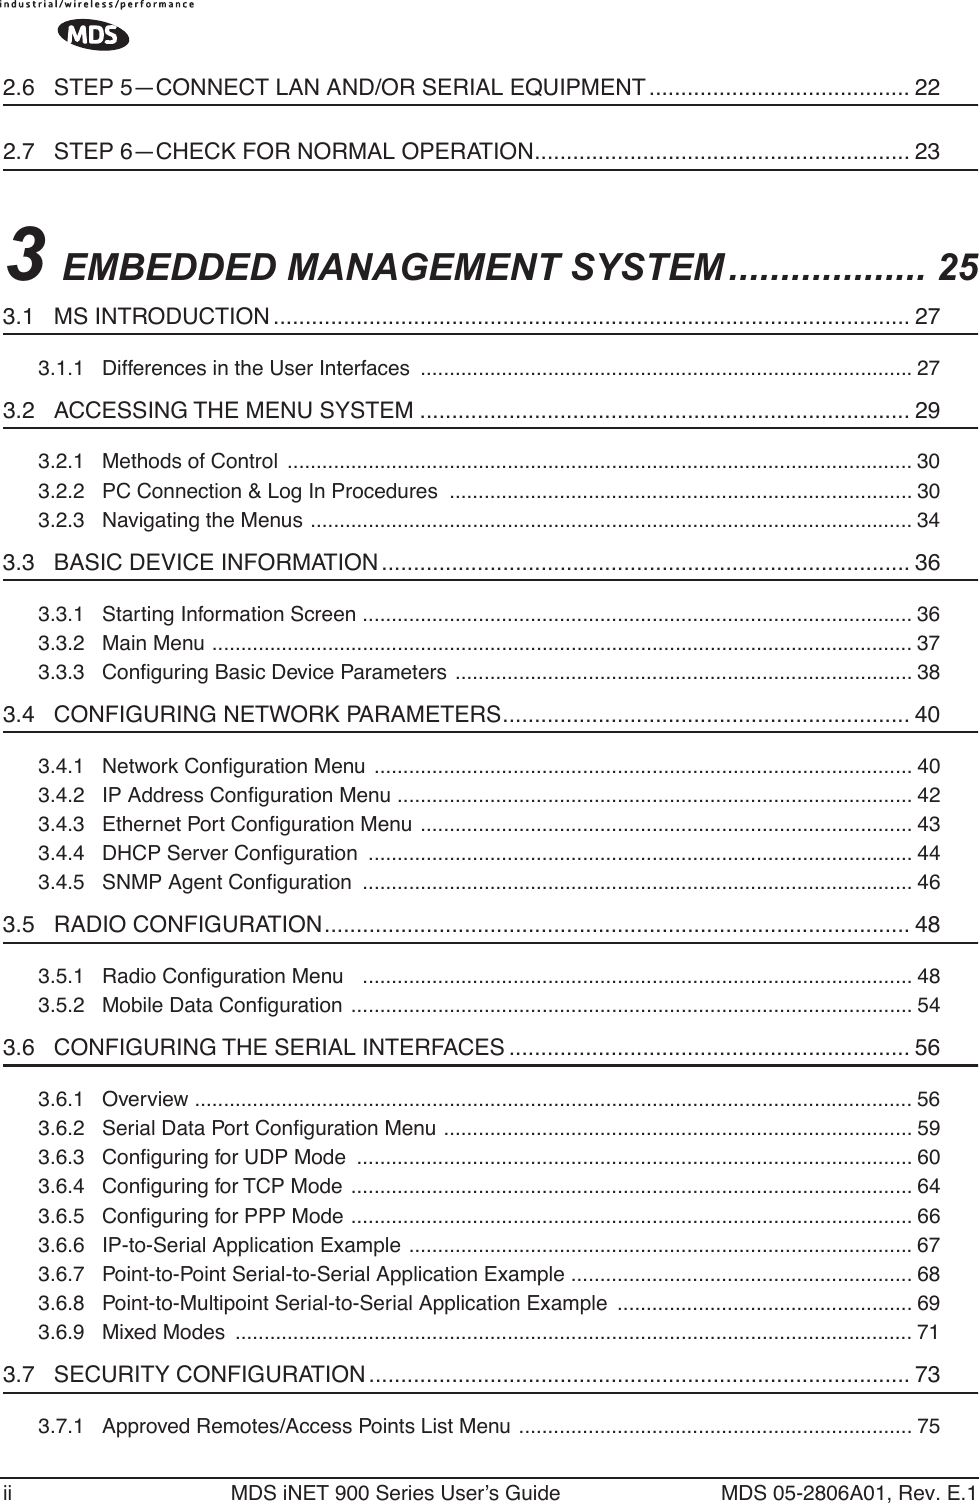  ii MDS iNET 900 Series User’s Guide MDS 05-2806A01, Rev. E.1 2.6   STEP 5—CONNECT LAN AND/OR SERIAL EQUIPMENT ......................................... 22 2.7   STEP 6—CHECK FOR NORMAL OPERATION........................................................... 23 3  EMBEDDED MANAGEMENT SYSTEM ................... 25 3.1   MS INTRODUCTION .................................................................................................... 27 3.1.1   Differences in the User Interfaces  .....................................................................................27 3.2   ACCESSING THE MENU SYSTEM ............................................................................. 29 3.2.1   Methods of Control  ............................................................................................................ 303.2.2   PC Connection &amp; Log In Procedures  ................................................................................ 303.2.3   Navigating the Menus ........................................................................................................ 34 3.3   BASIC DEVICE INFORMATION ................................................................................... 36 3.3.1   Starting Information Screen ............................................................................................... 363.3.2   Main Menu ......................................................................................................................... 373.3.3   Conﬁguring Basic Device Parameters ............................................................................... 38 3.4   CONFIGURING NETWORK PARAMETERS................................................................ 40 3.4.1   Network Conﬁguration Menu ............................................................................................. 403.4.2   IP Address Conﬁguration Menu ......................................................................................... 423.4.3   Ethernet Port Conﬁguration Menu ..................................................................................... 433.4.4   DHCP Server Conﬁguration .............................................................................................. 443.4.5   SNMP Agent Conﬁguration ............................................................................................... 46 3.5   RADIO CONFIGURATION............................................................................................ 48 3.5.1   Radio Conﬁguration Menu   ............................................................................................... 483.5.2   Mobile Data Conﬁguration ................................................................................................. 54 3.6   CONFIGURING THE SERIAL INTERFACES ............................................................... 56 3.6.1   Overview ............................................................................................................................ 563.6.2   Serial Data Port Conﬁguration Menu ................................................................................. 593.6.3   Conﬁguring for UDP Mode  ................................................................................................ 603.6.4   Conﬁguring for TCP Mode  ................................................................................................. 643.6.5   Conﬁguring for PPP Mode ................................................................................................. 663.6.6   IP-to-Serial Application Example .......................................................................................673.6.7   Point-to-Point Serial-to-Serial Application Example ........................................................... 683.6.8   Point-to-Multipoint Serial-to-Serial Application Example  ................................................... 693.6.9   Mixed Modes  ..................................................................................................................... 71 3.7   SECURITY CONFIGURATION ..................................................................................... 73 3.7.1   Approved Remotes/Access Points List Menu .................................................................... 75